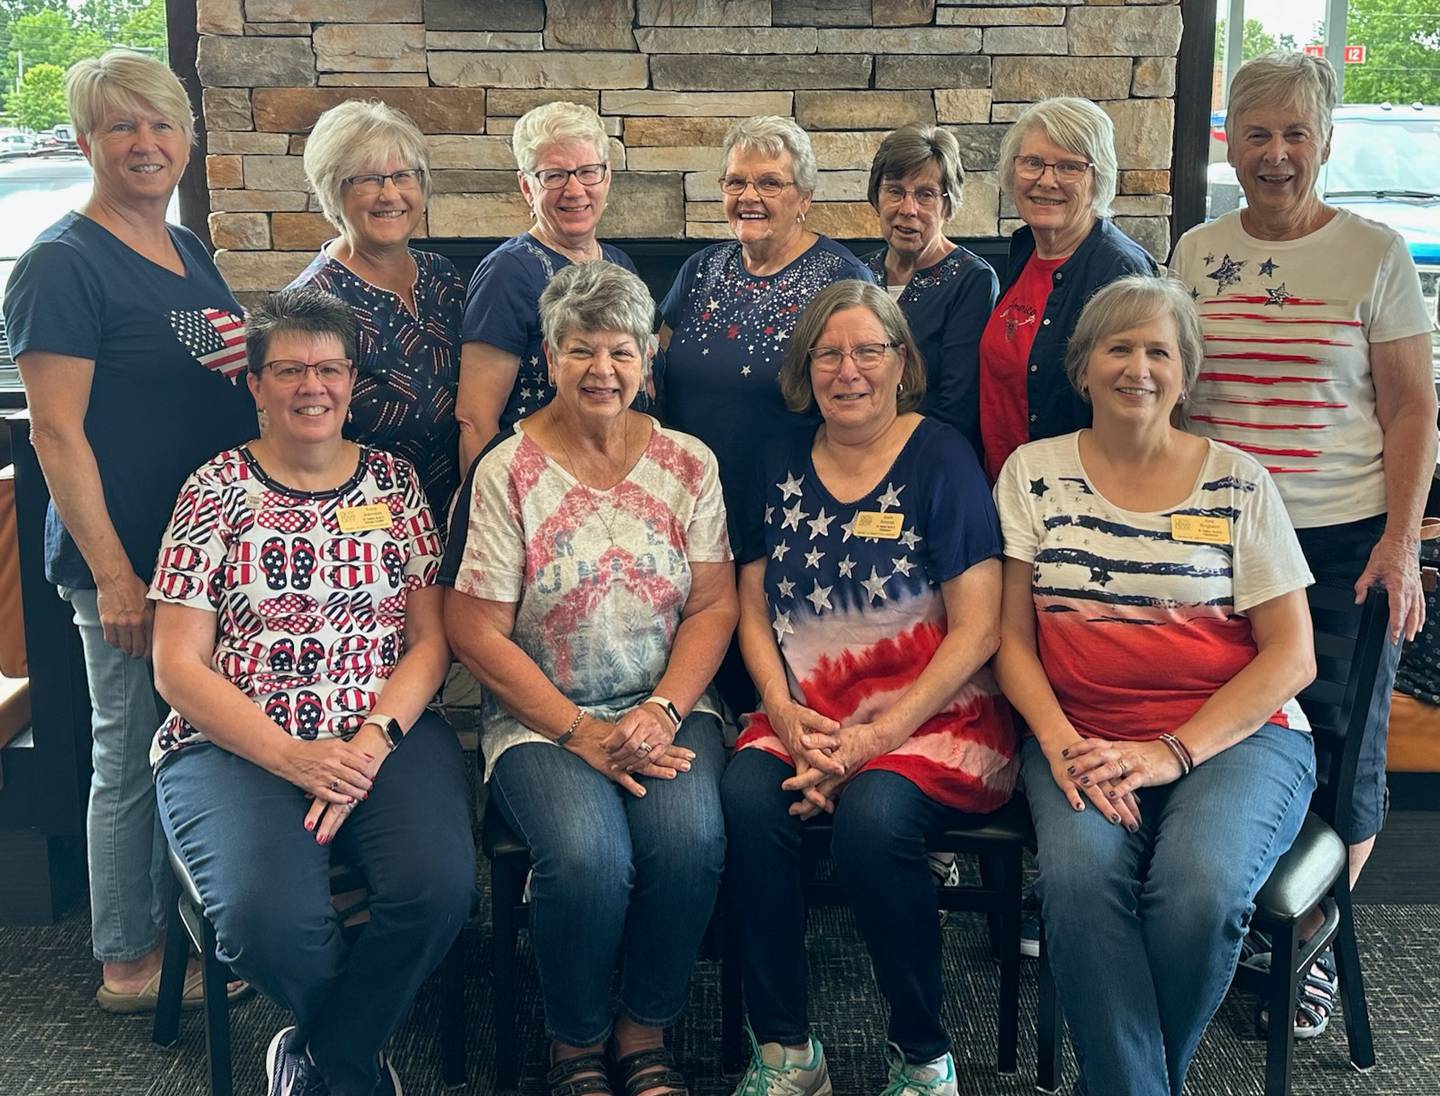 Quilts of Valor Seamstresses including (front from left) Terry Johnson, Liz Piacenti, Barb Amrein, Ann Register, (Back from left) Tracy Hannon, Susan Friel, Betty Baznik, Carol Gerbitz, Barb Donahue, Shirley Steele and Betty Stocking.